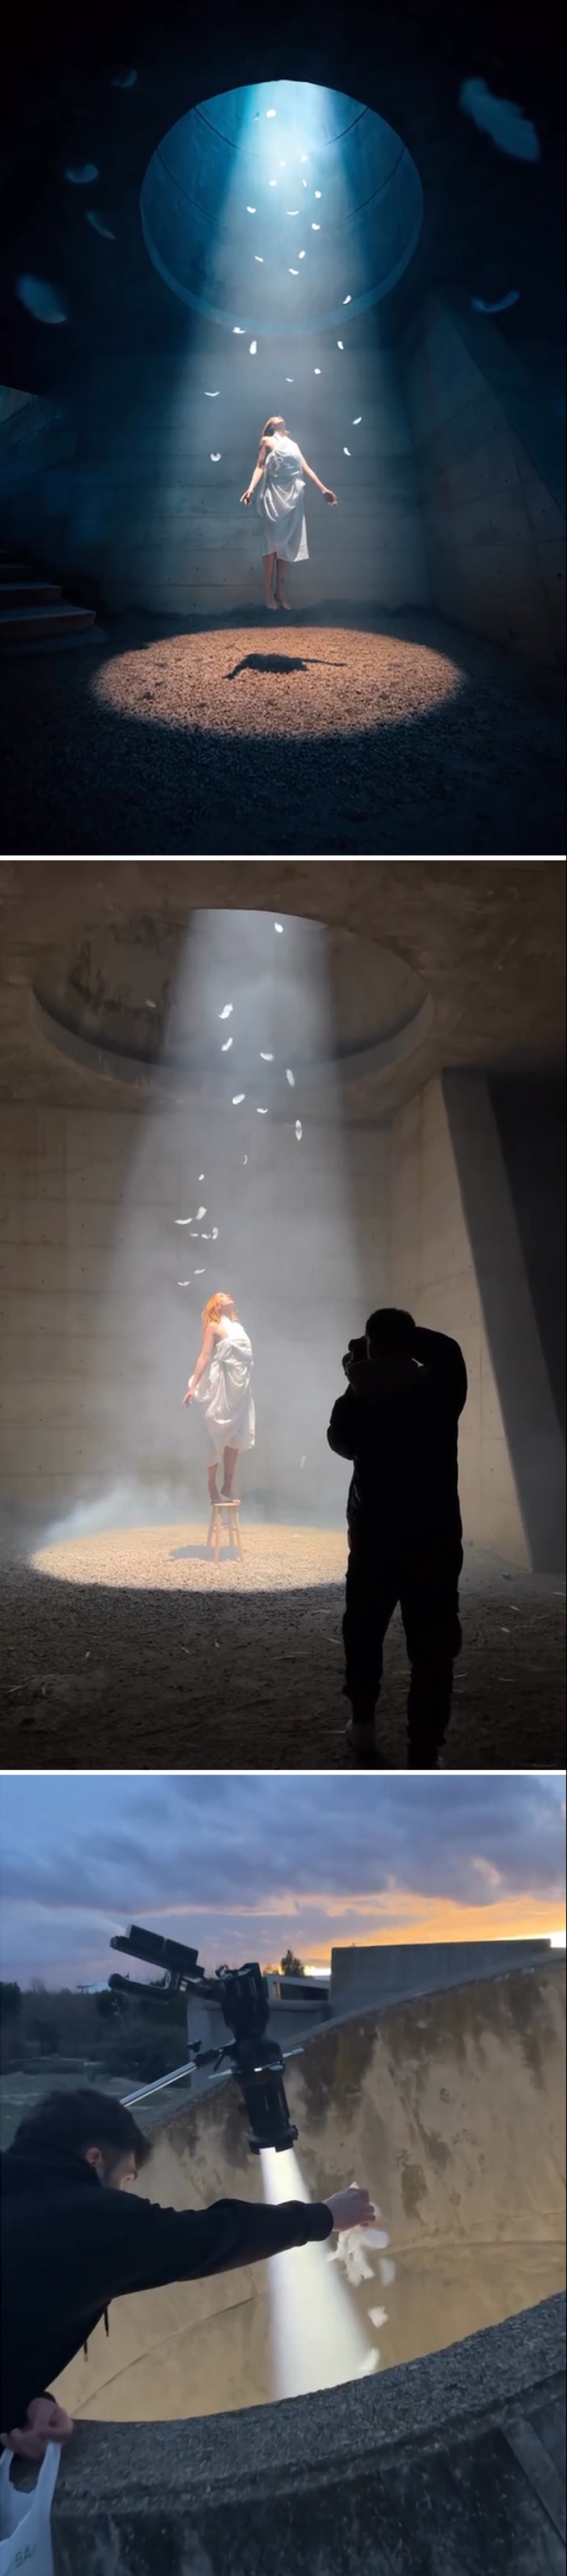 Behind The Scenes: 11 Creative Photography Tricks Revealed By Jordi Koalitic